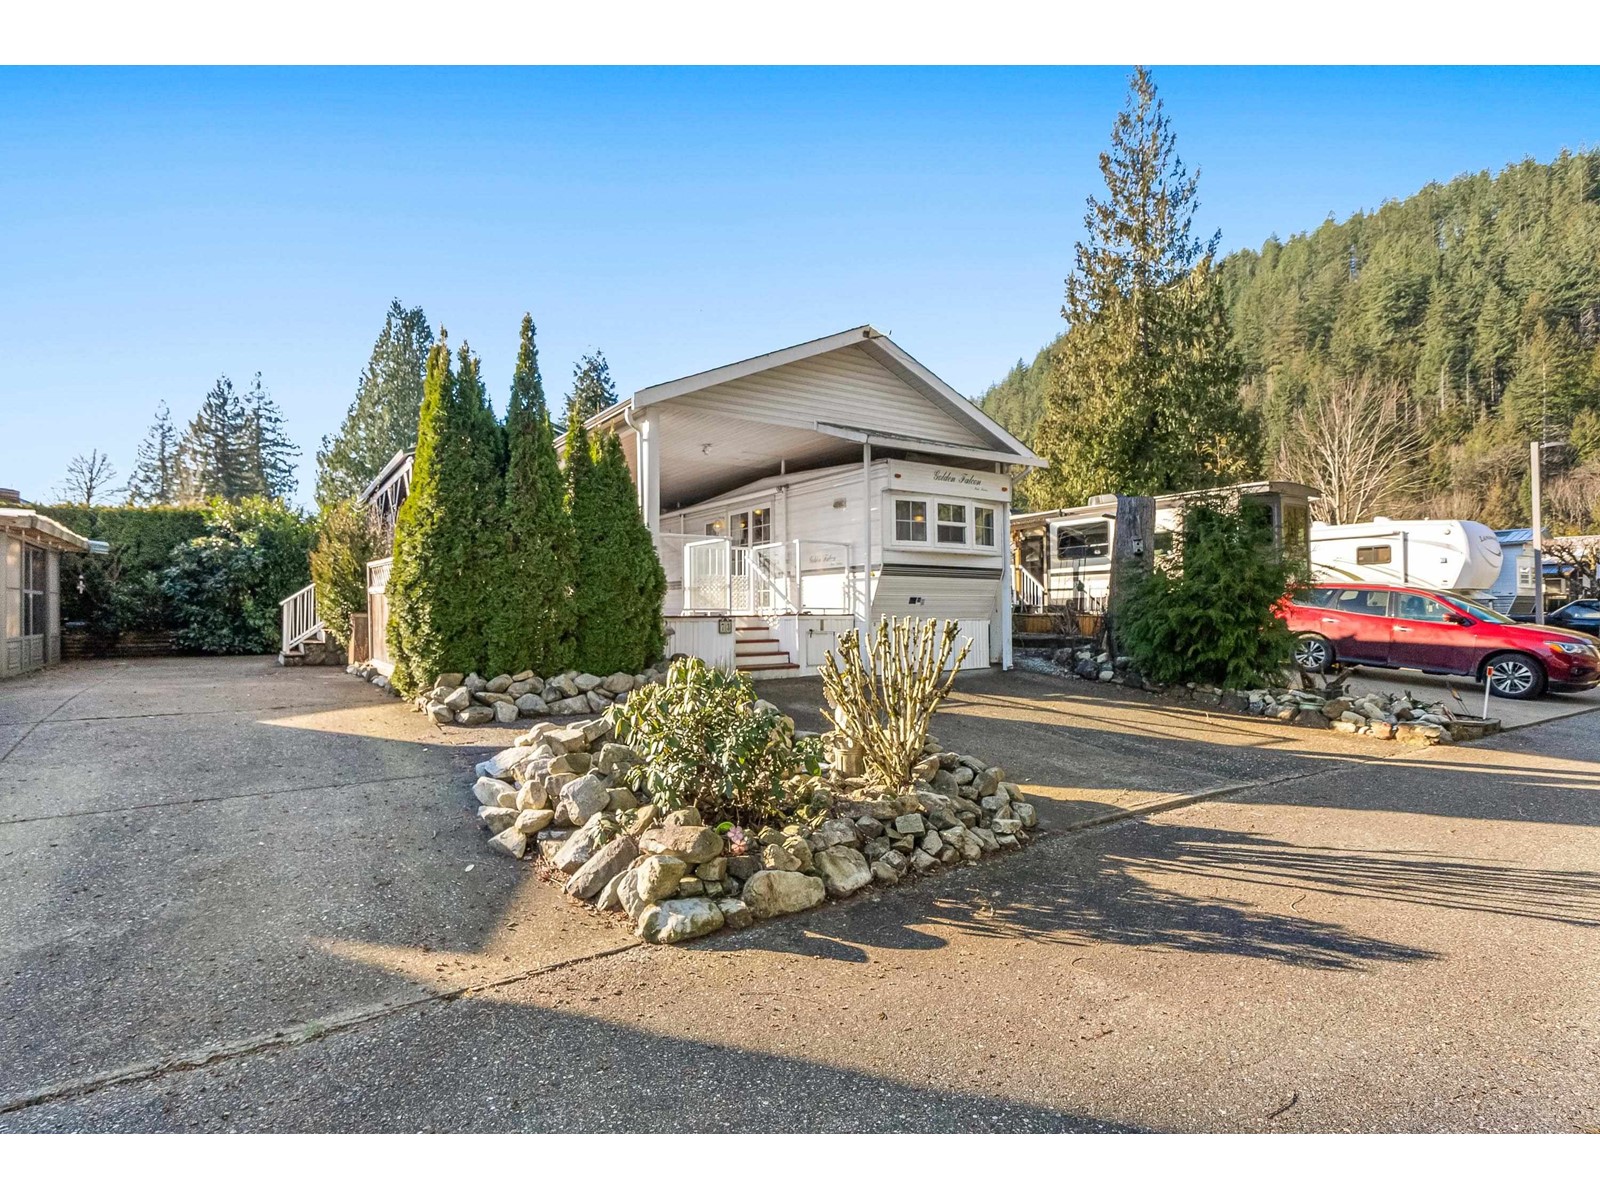 73 14600 MORRIS VALLEY ROAD, Mission